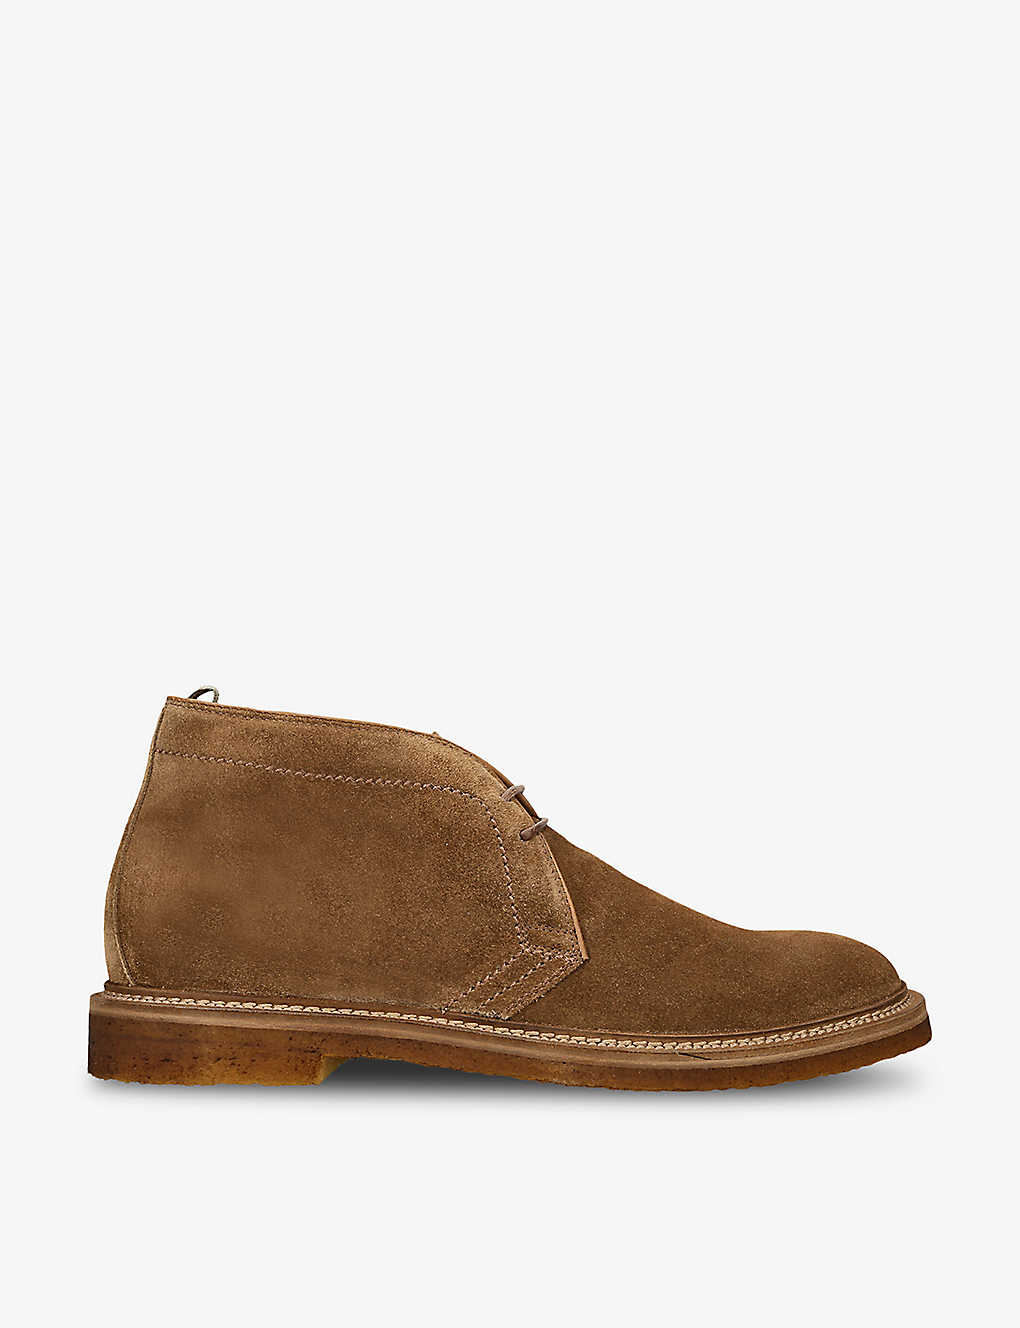 Officine Creative Mens Tan Hopkins Crepe Suede Lace-up Ankle Boots